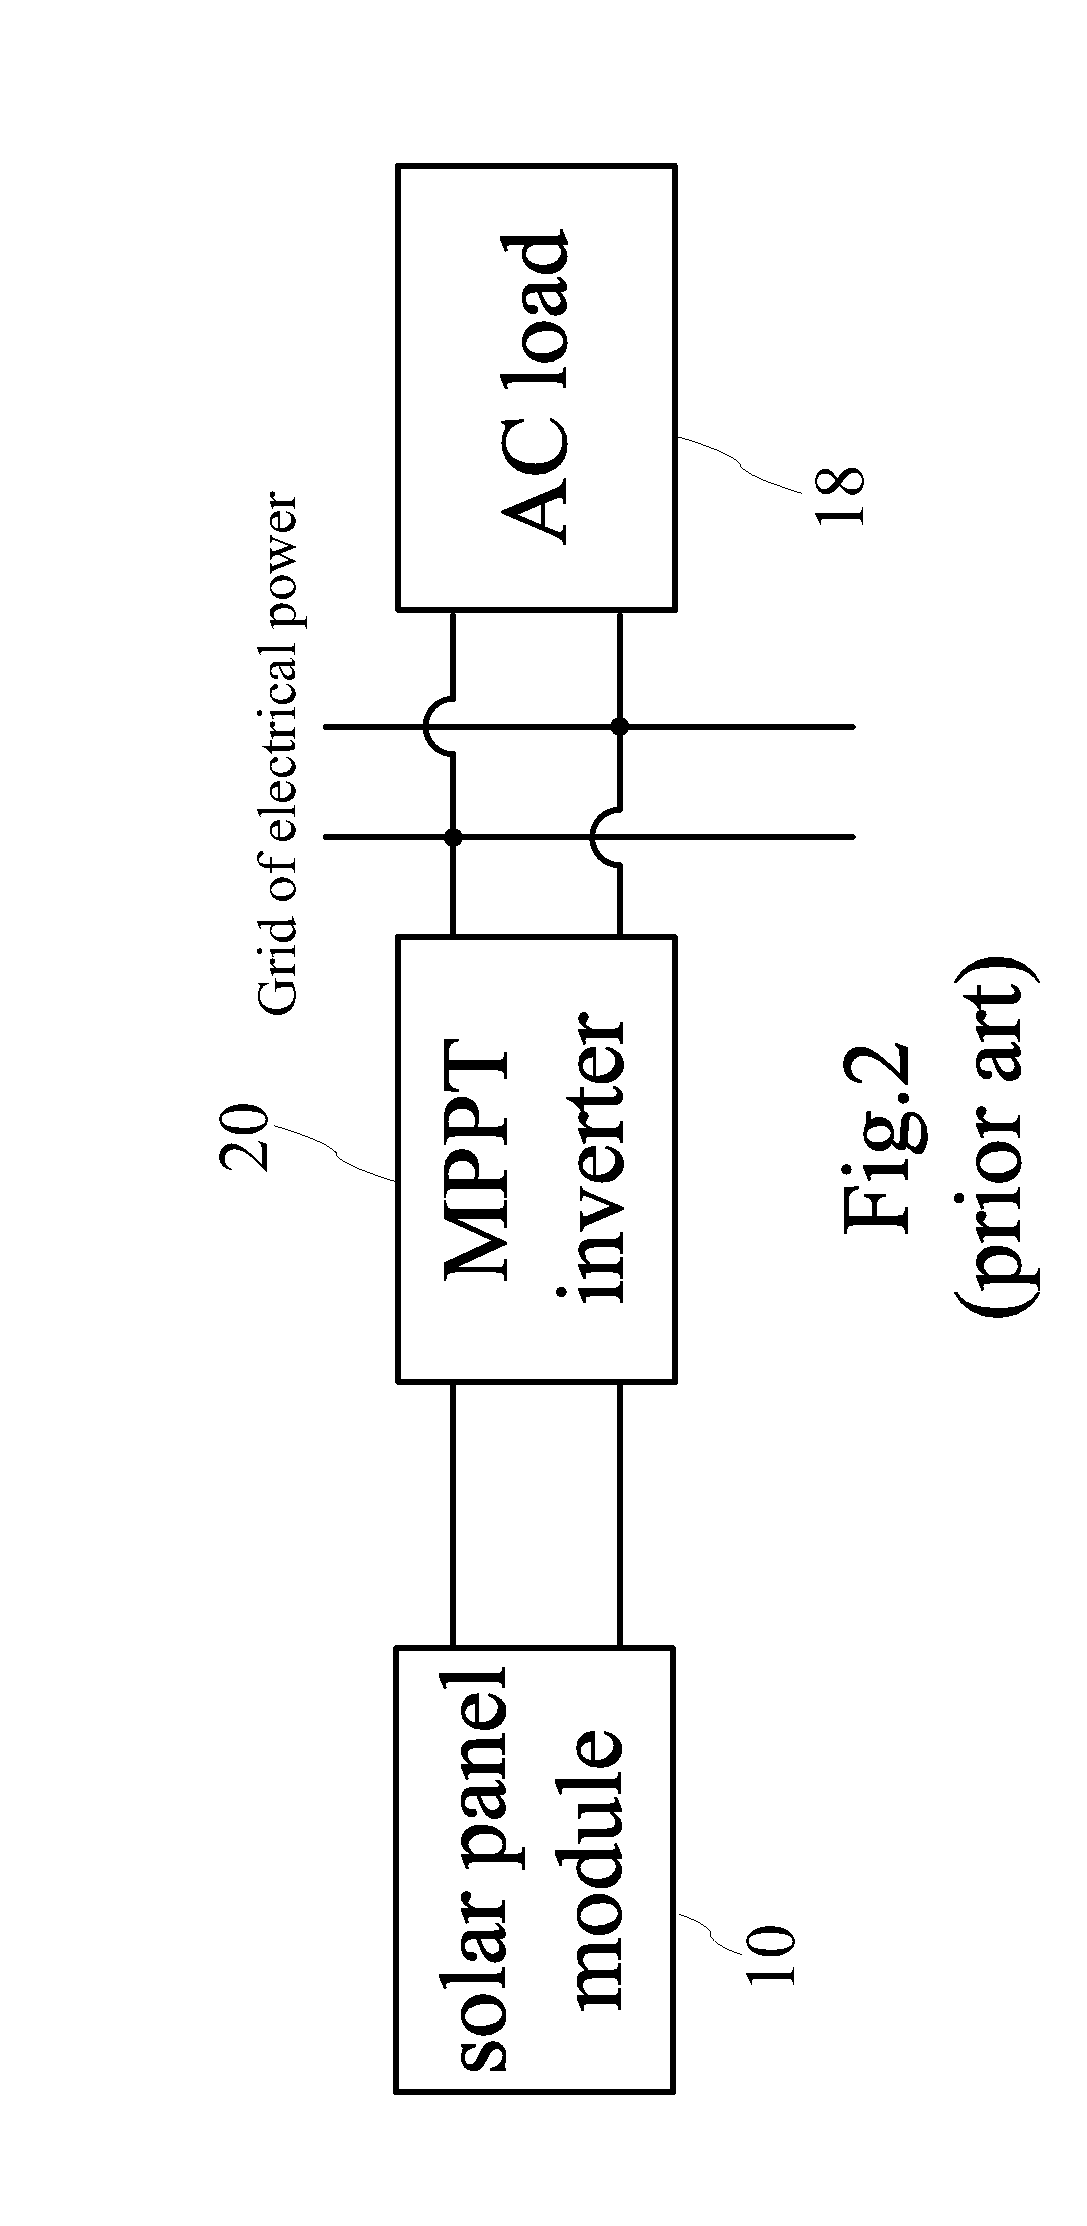 Solar generator capable of power tracking and electric characteristic curve measurement and method for realizing the same